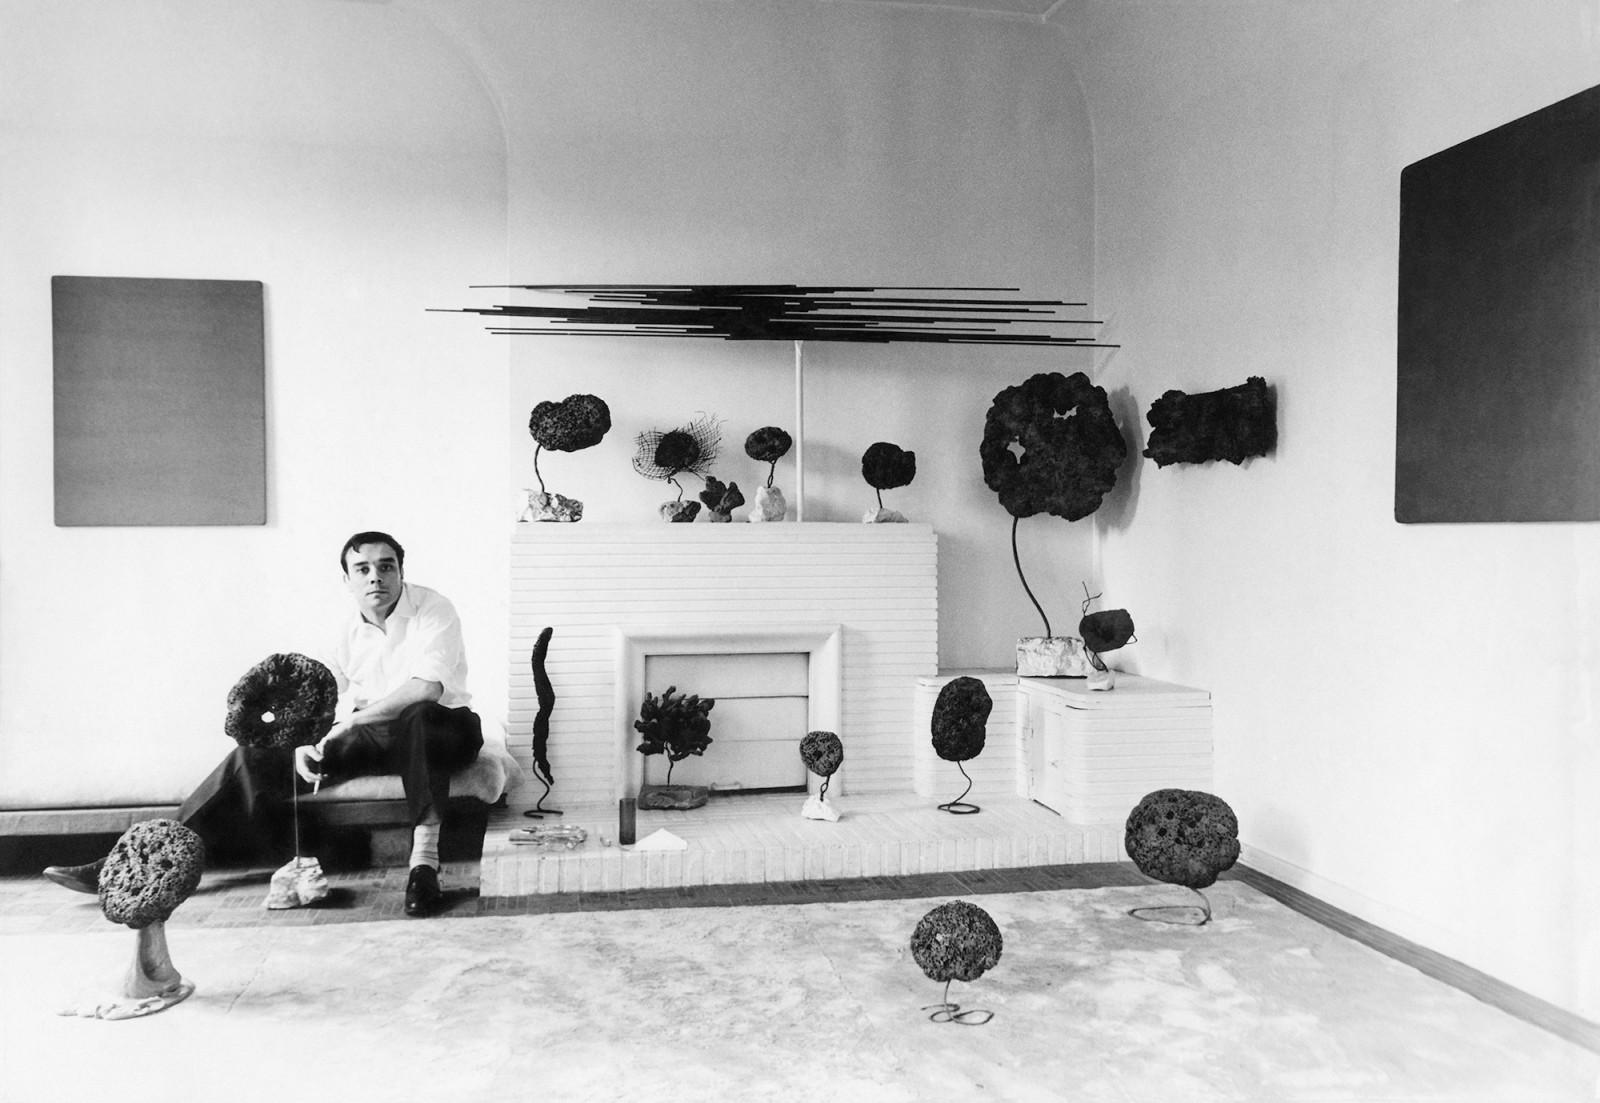 Yves Klein in his studio surrounded by his Sponge Sculptures